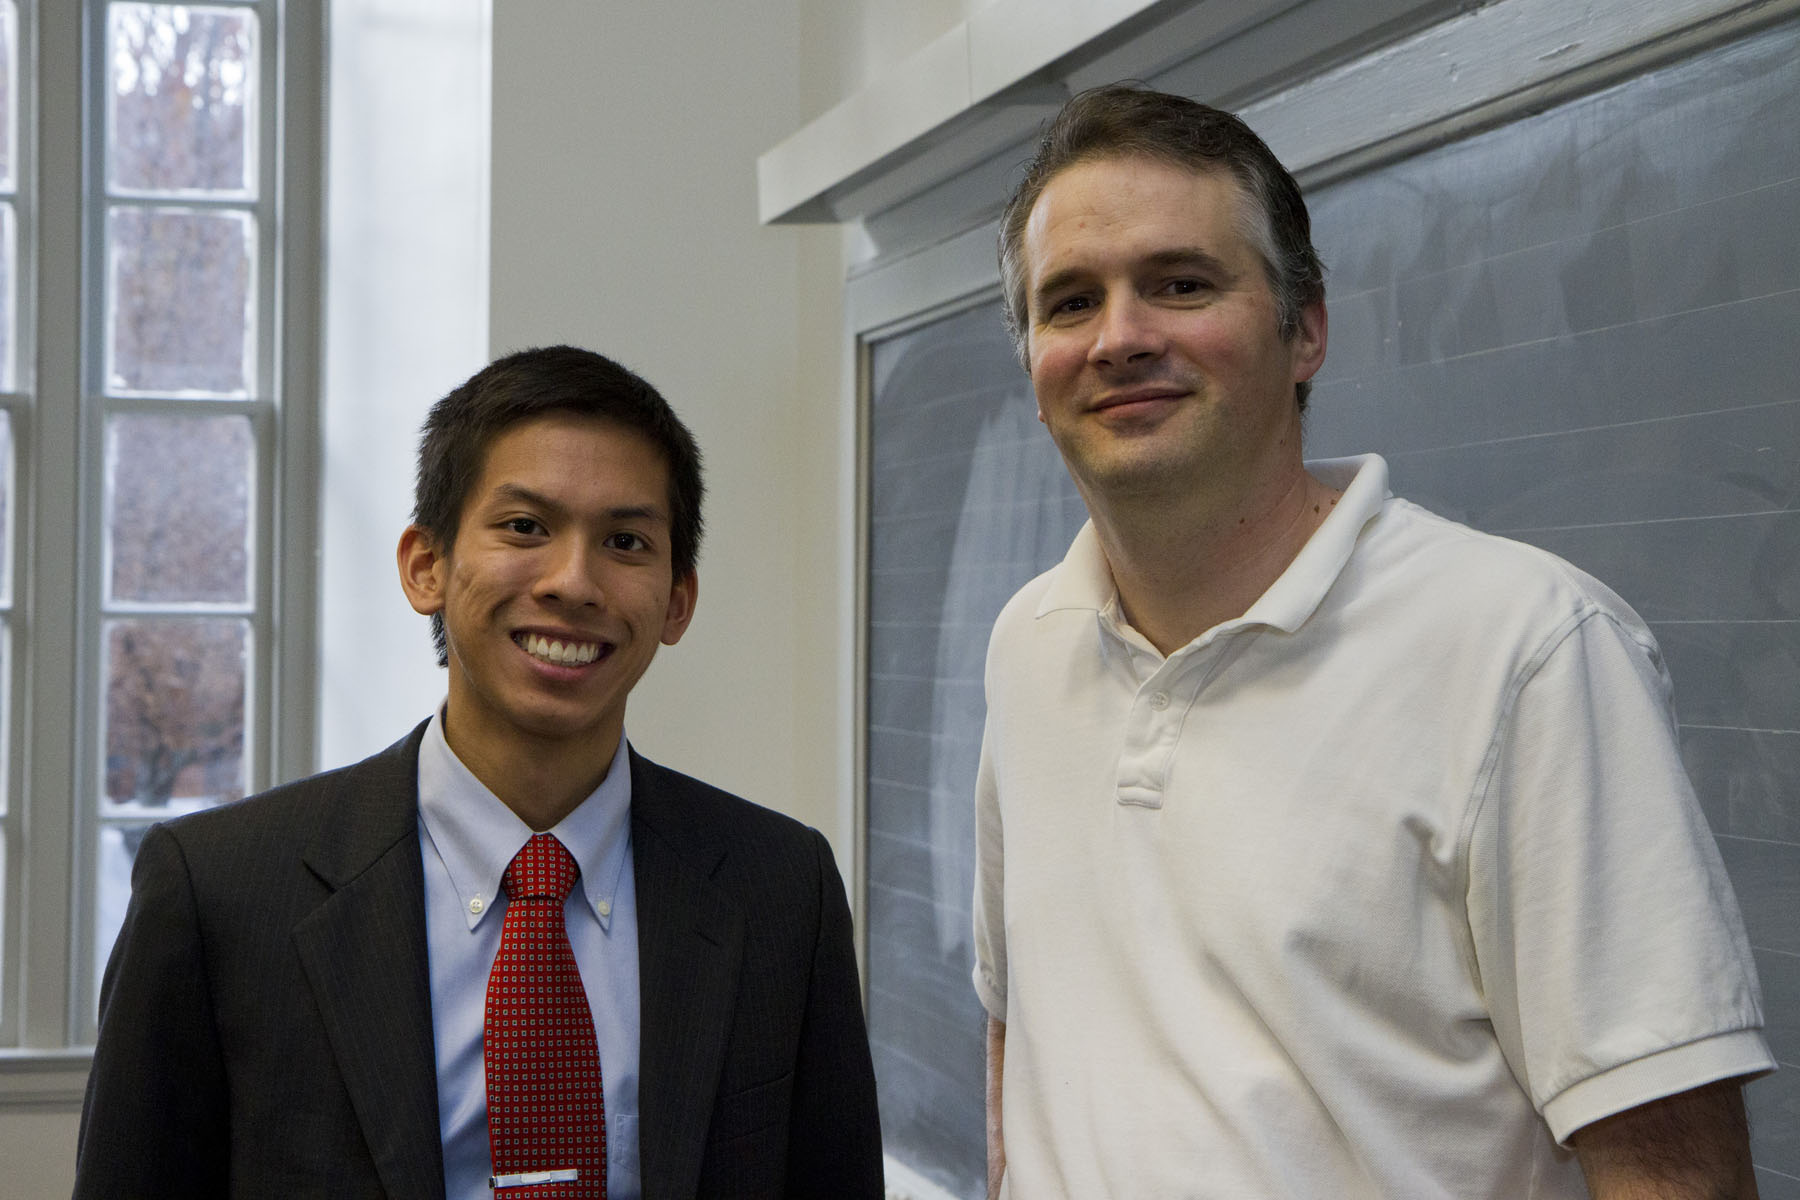 Ken Tran and Dr. Paul Yates stand together smiling at the camera